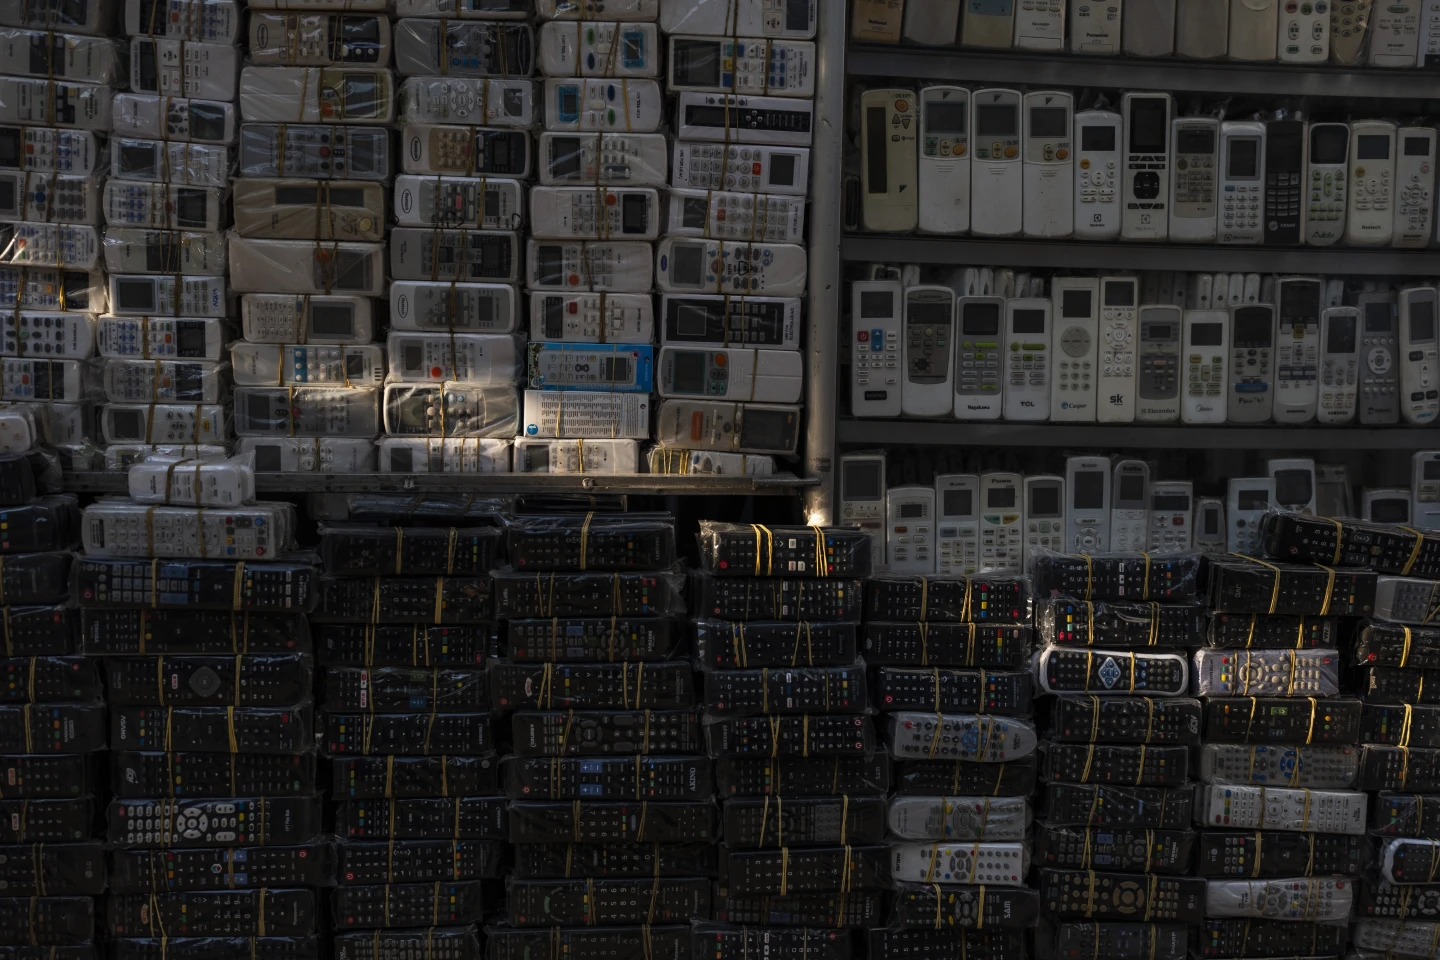 Used remote controls for various home appliances are lit by afternoon sunlight in Nhat Tao market, the largest informal recycling market in Ho Chi Minh City, Vietnam, Sunday, 28 January 2024. Photo: Jae C. Hong / AP Photo